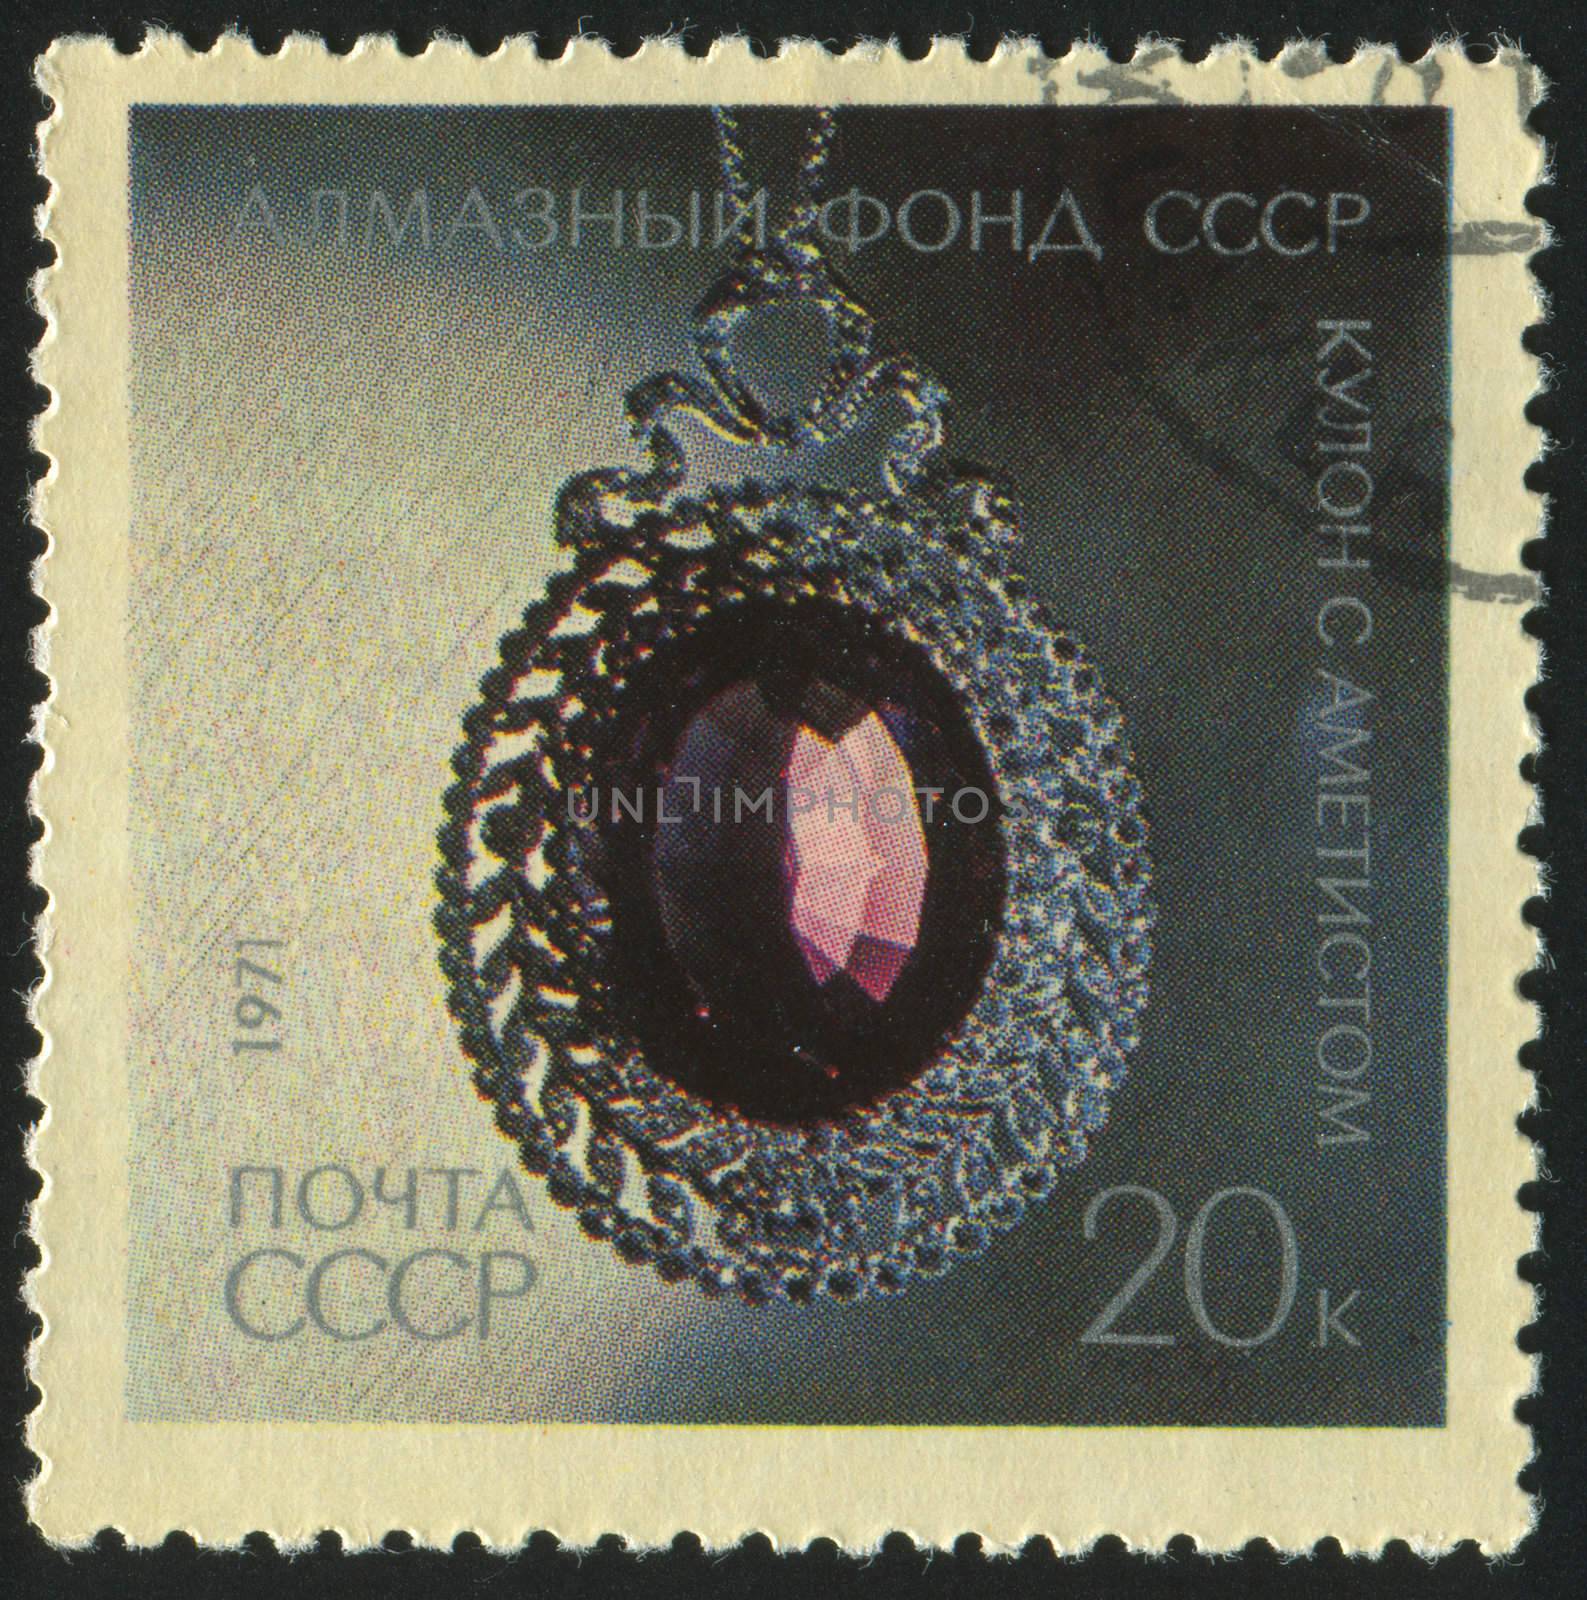 RUSSIA - CIRCA 1971: stamp printed by Russia, shows Amethyst and diamond pendant, circa 1971.